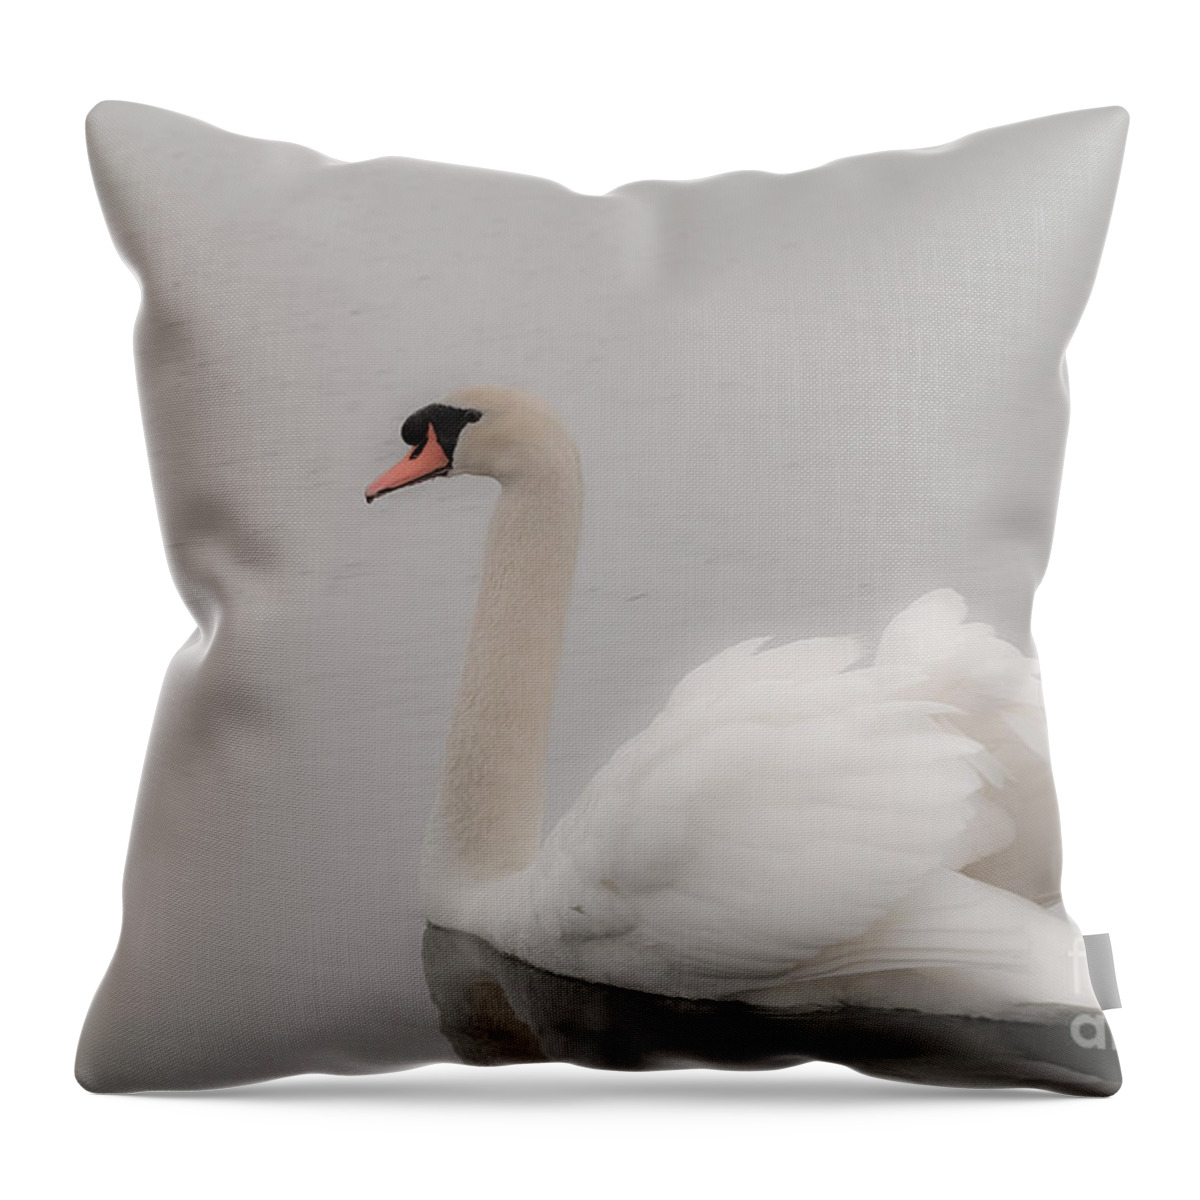 Dream Throw Pillow featuring the photograph The Dream by Charles Dobbs